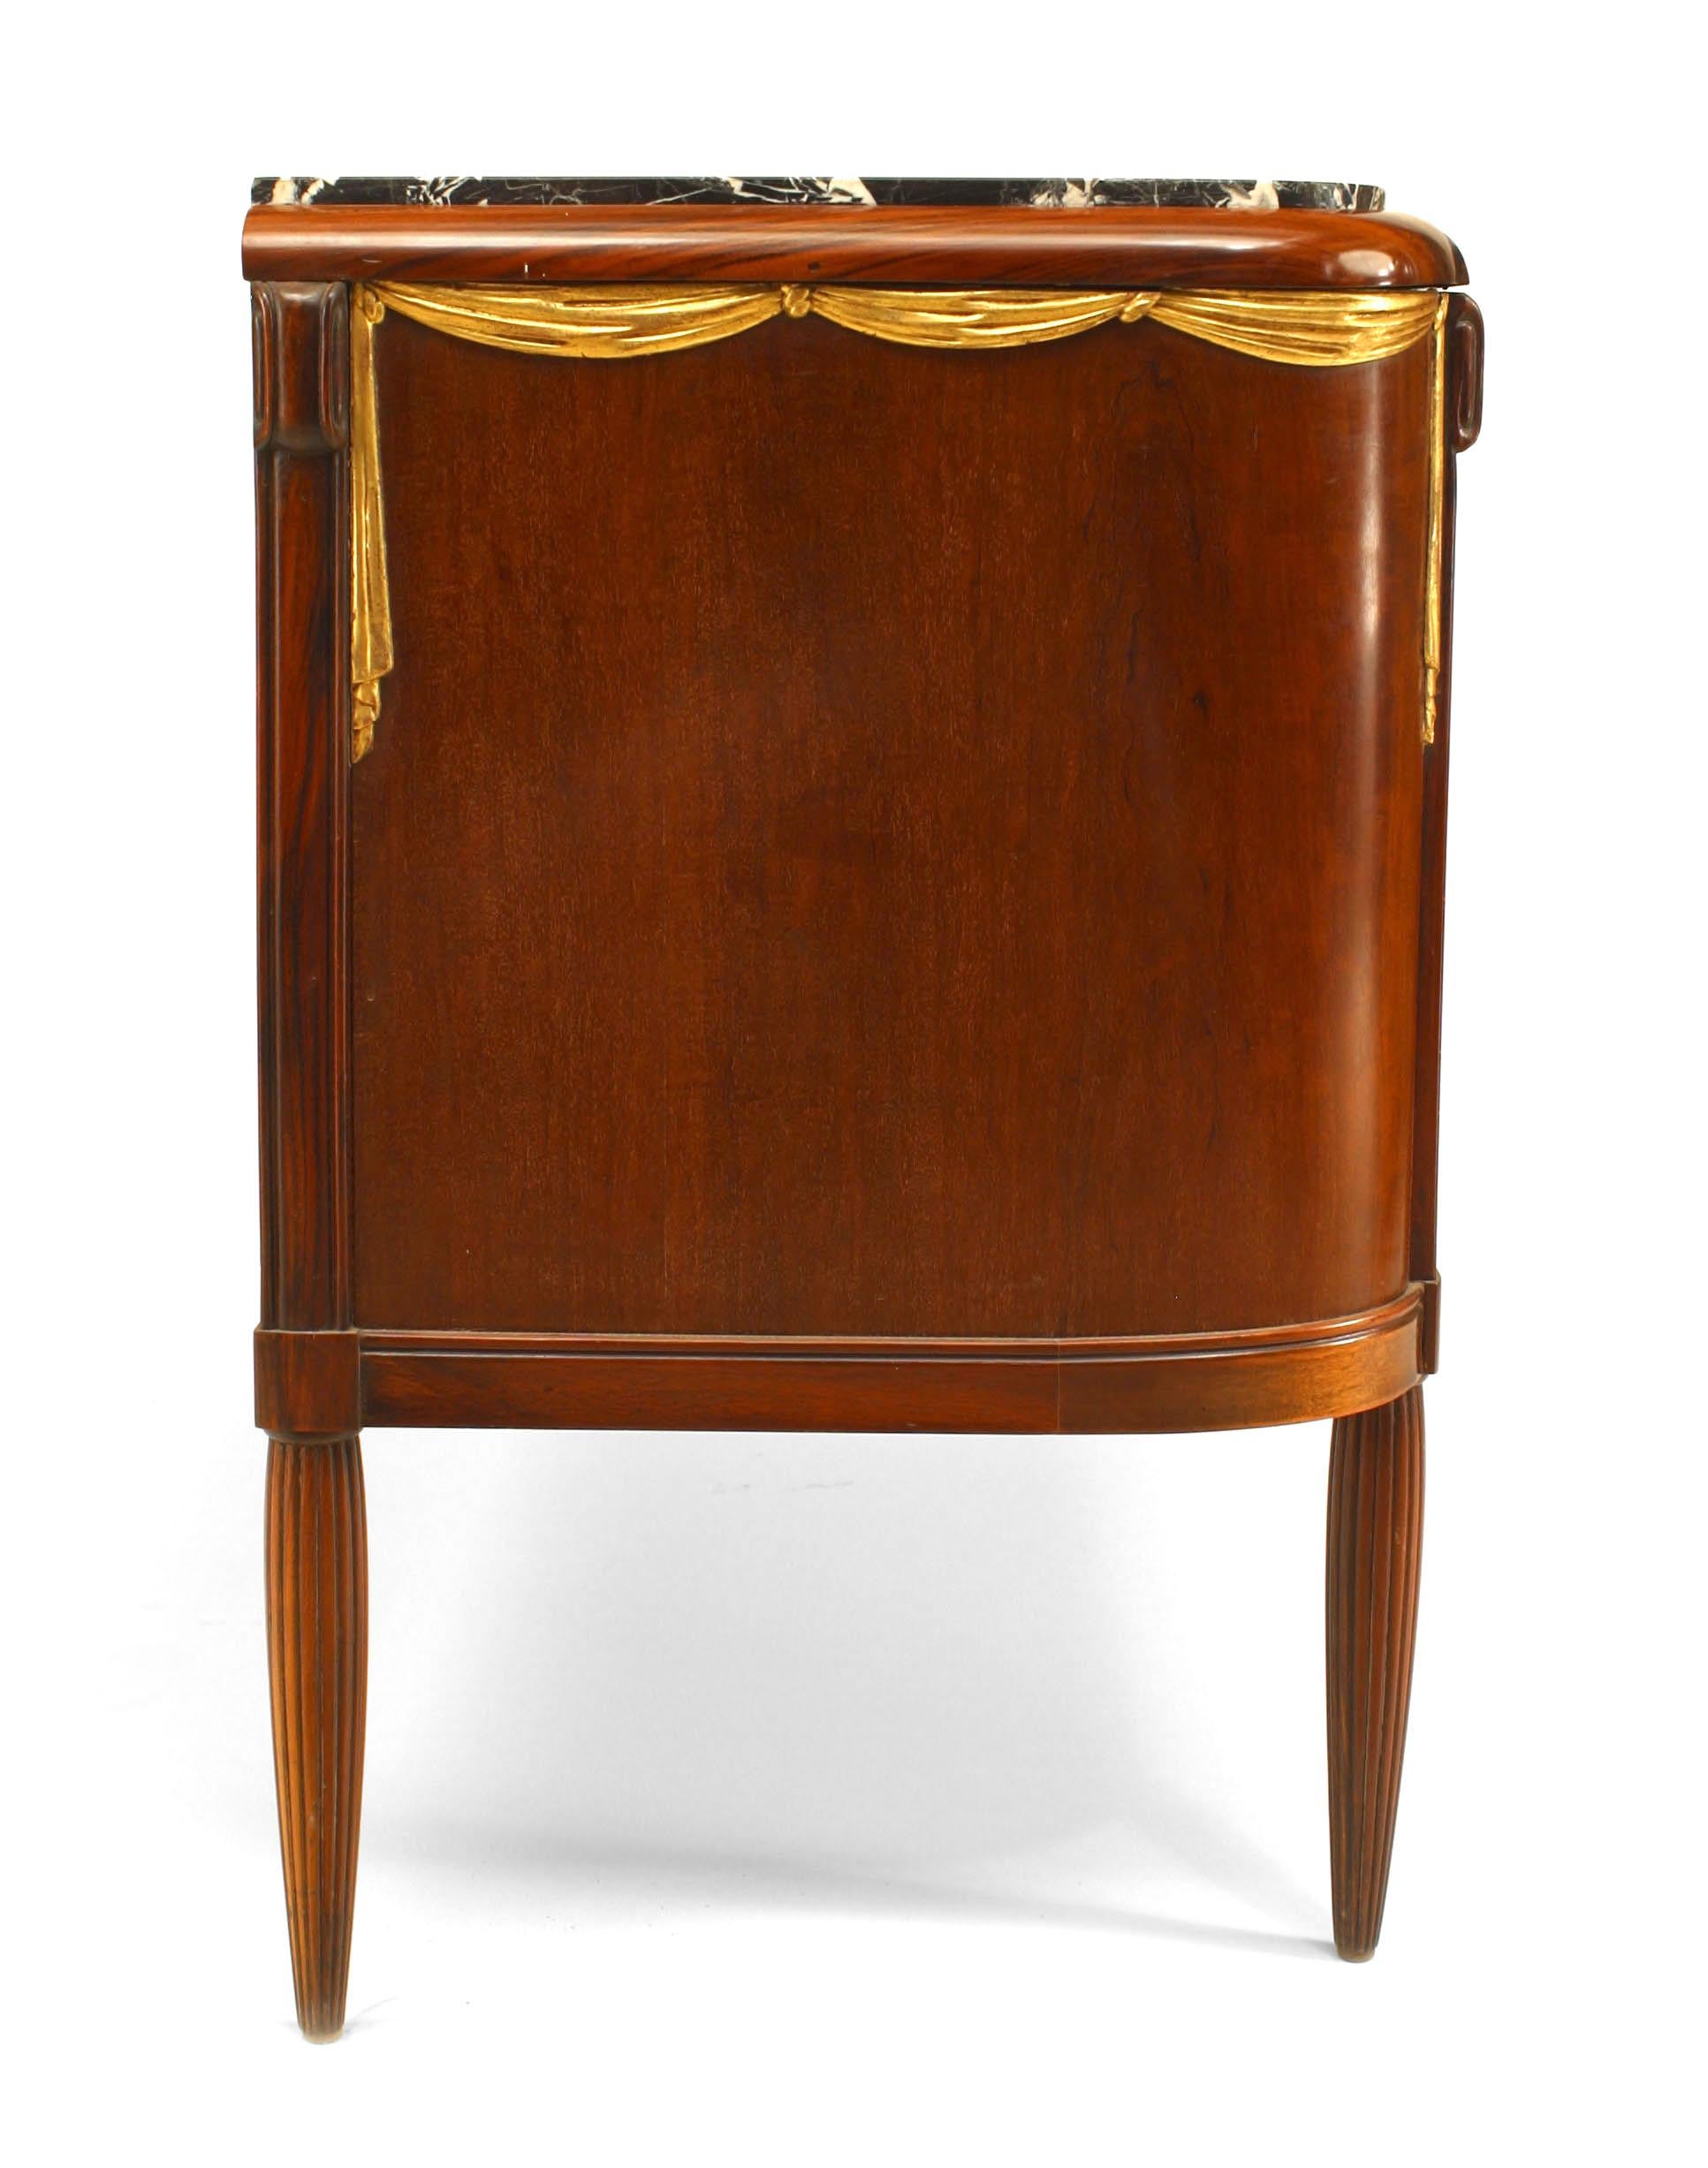 French Art Deco Dufrene Mahogany & Marble Commode In Good Condition For Sale In New York, NY